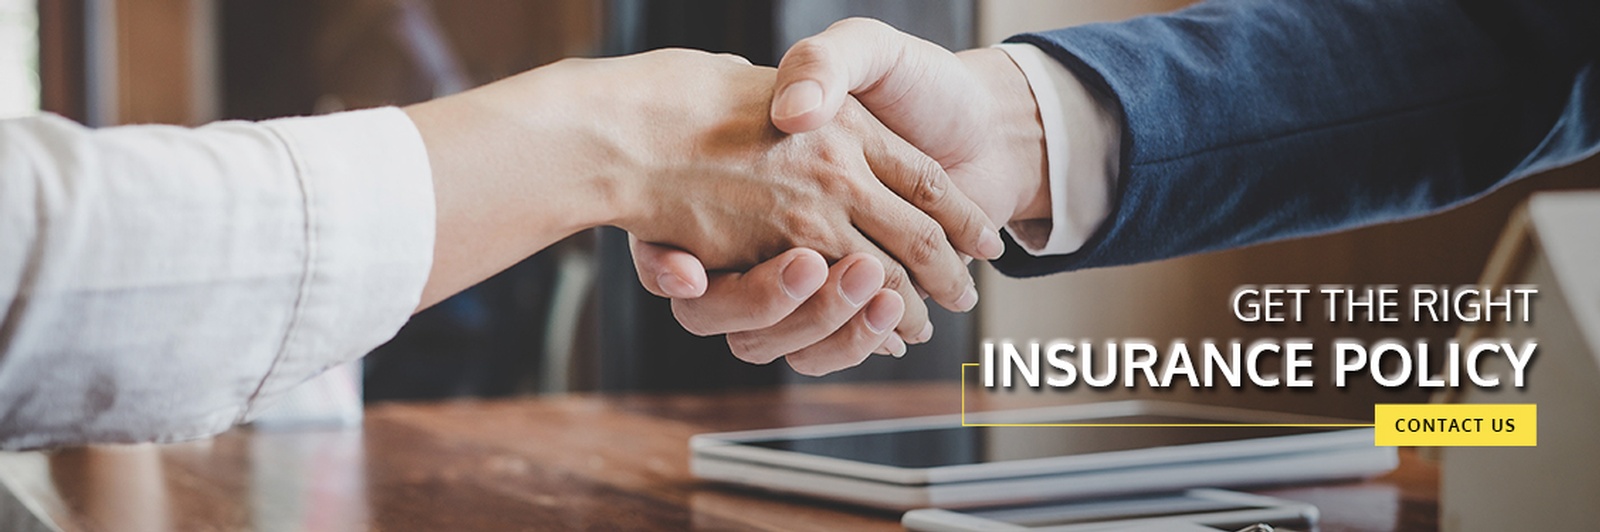 Okanagan Valley Insurance Service Ltd. ensures you receive the best insurance solution available